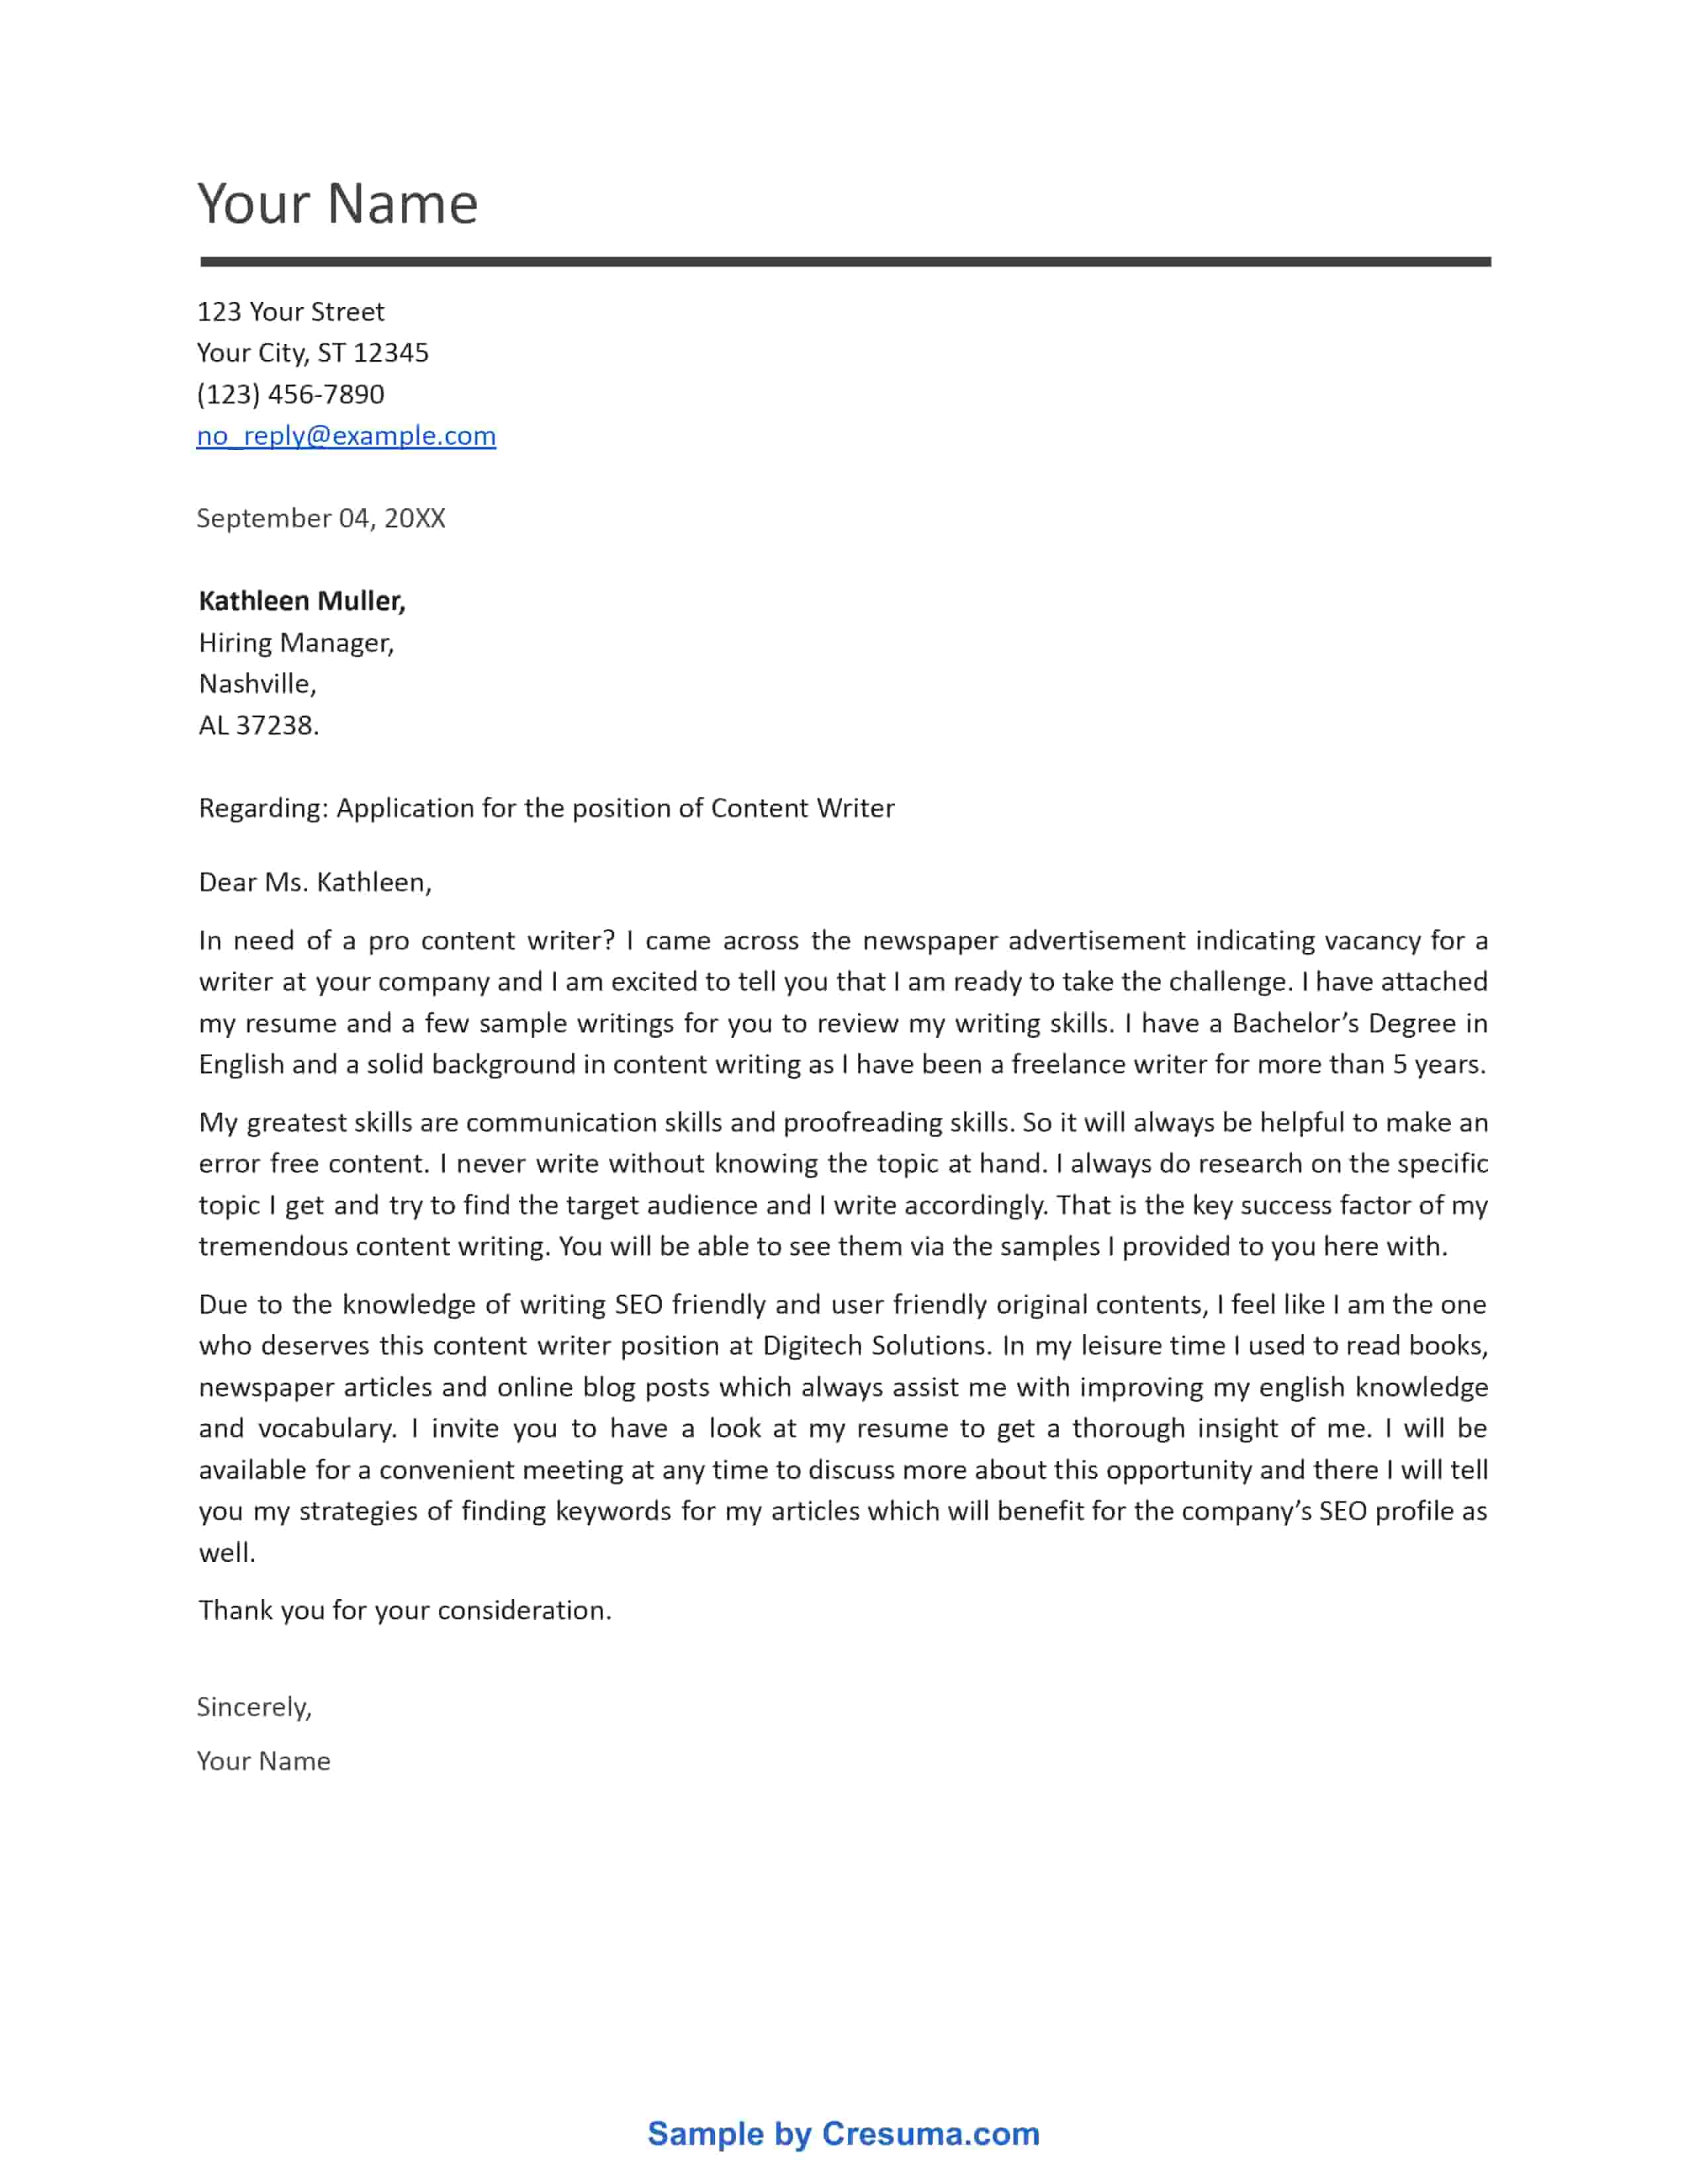 Content writer cover letter example template 4